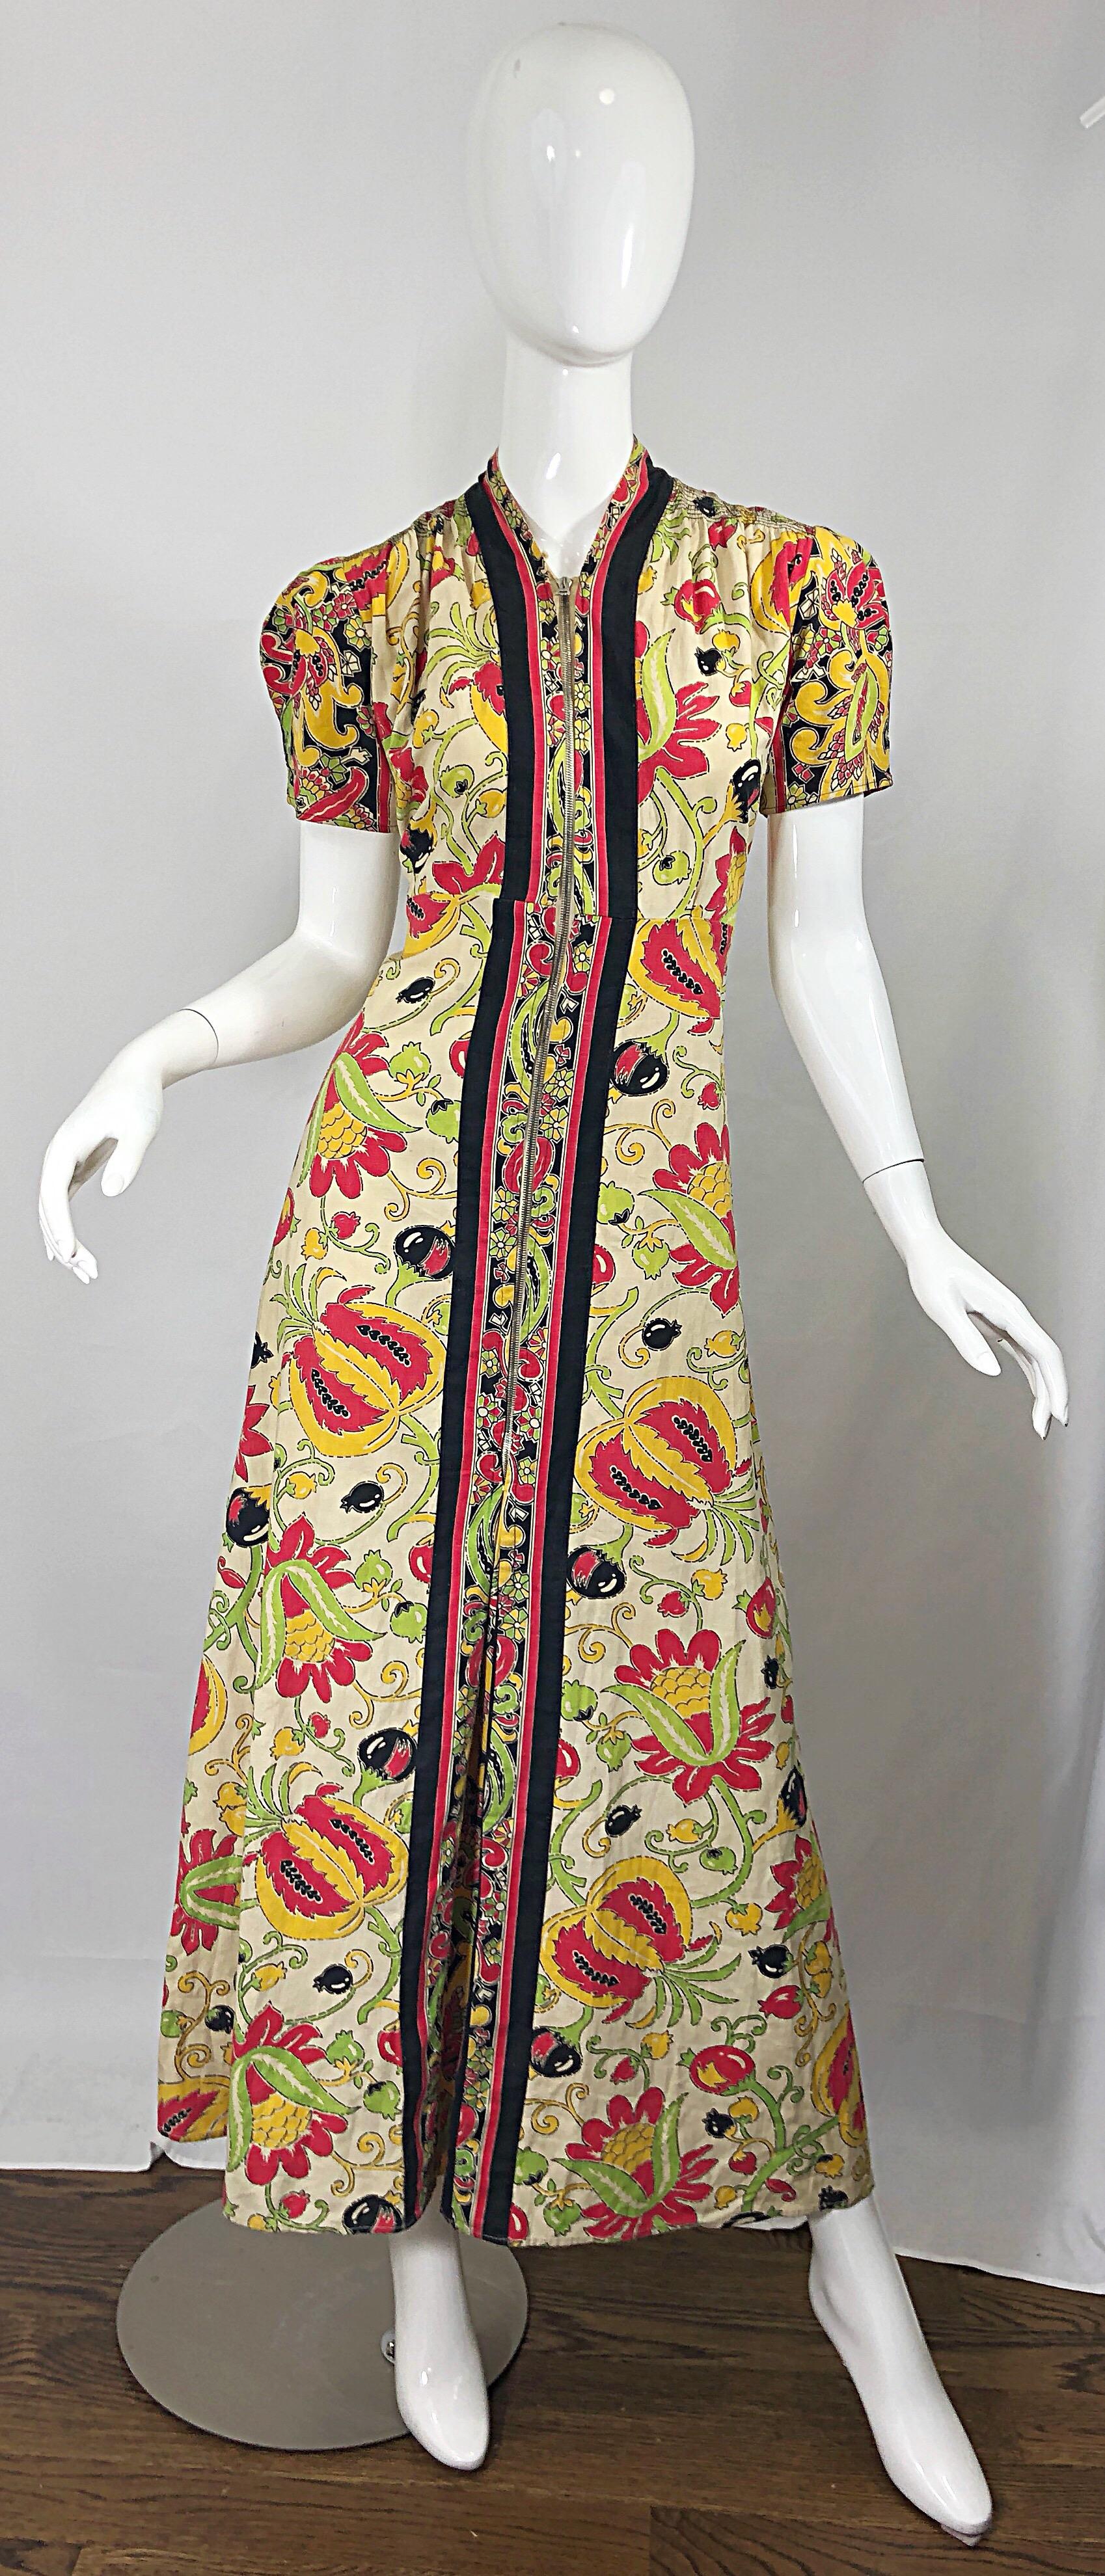 Amazing vintage 1940s Botanical Asian inspired linen and cotton maxi dress! Features vibrant colors of red, green, yellow, black and beige. Full metal zipper up the front to control cleavage. Chic slightly puckered puff sleeves. Very well made, with